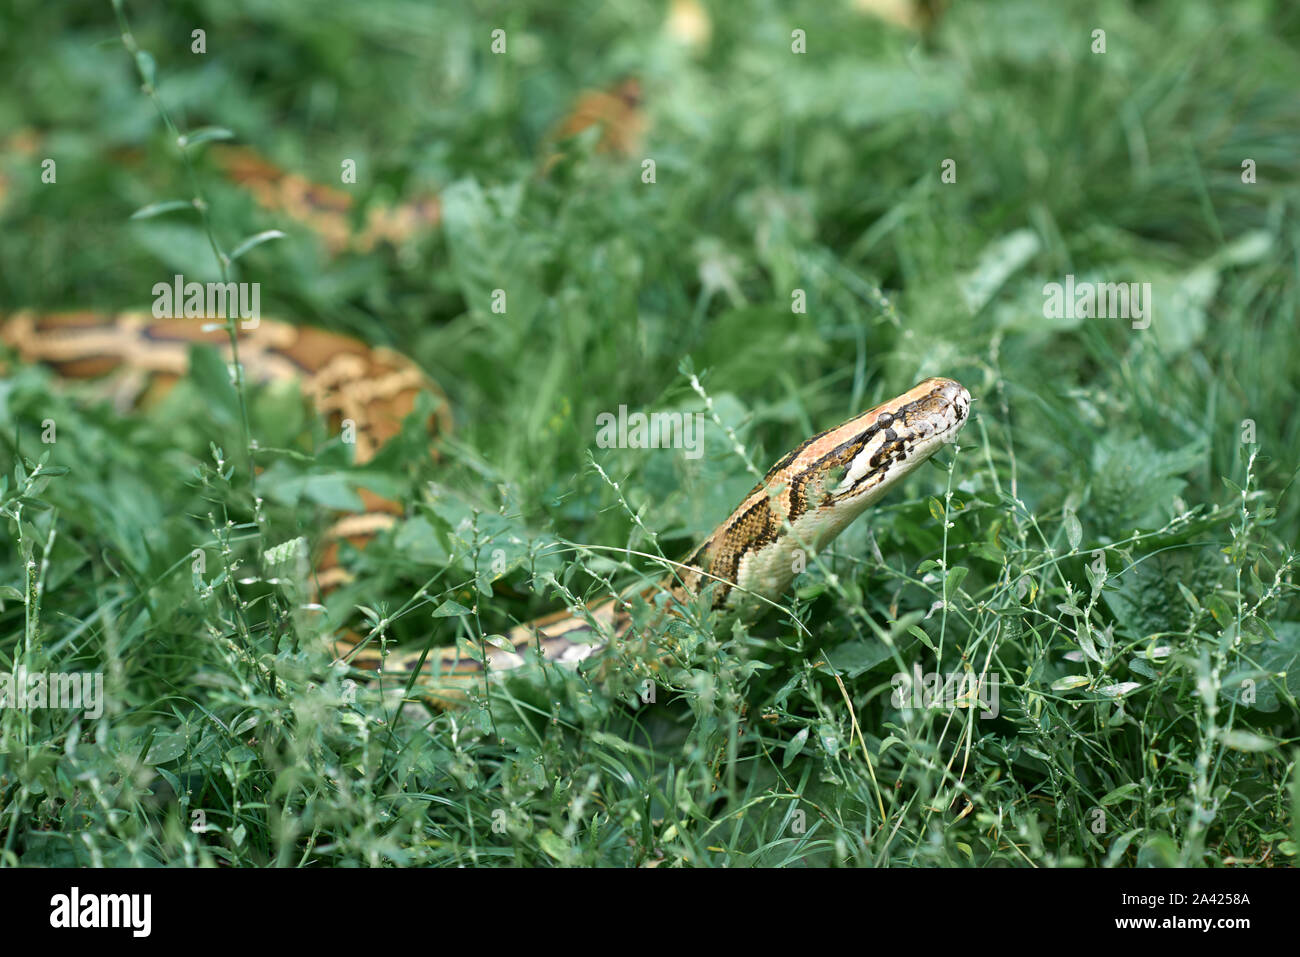 Side view of long phyton lying in green grass. Serpent creeping in garden. Stock Photo